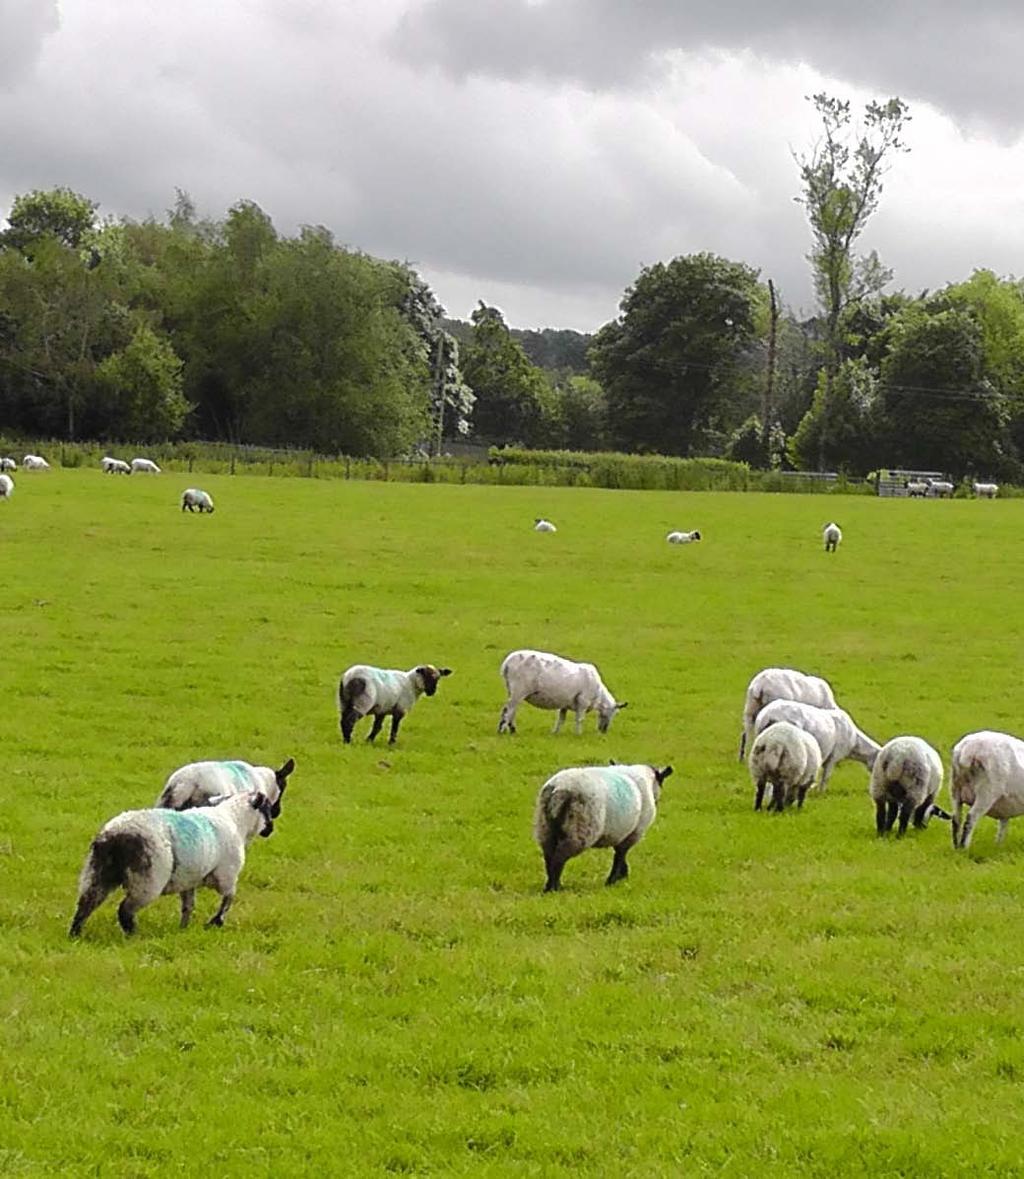 Should our UK sheep industry be restructured? Is increased sheep UK production expedient? fundamental importance of small ruminant production in resource-poor environments.